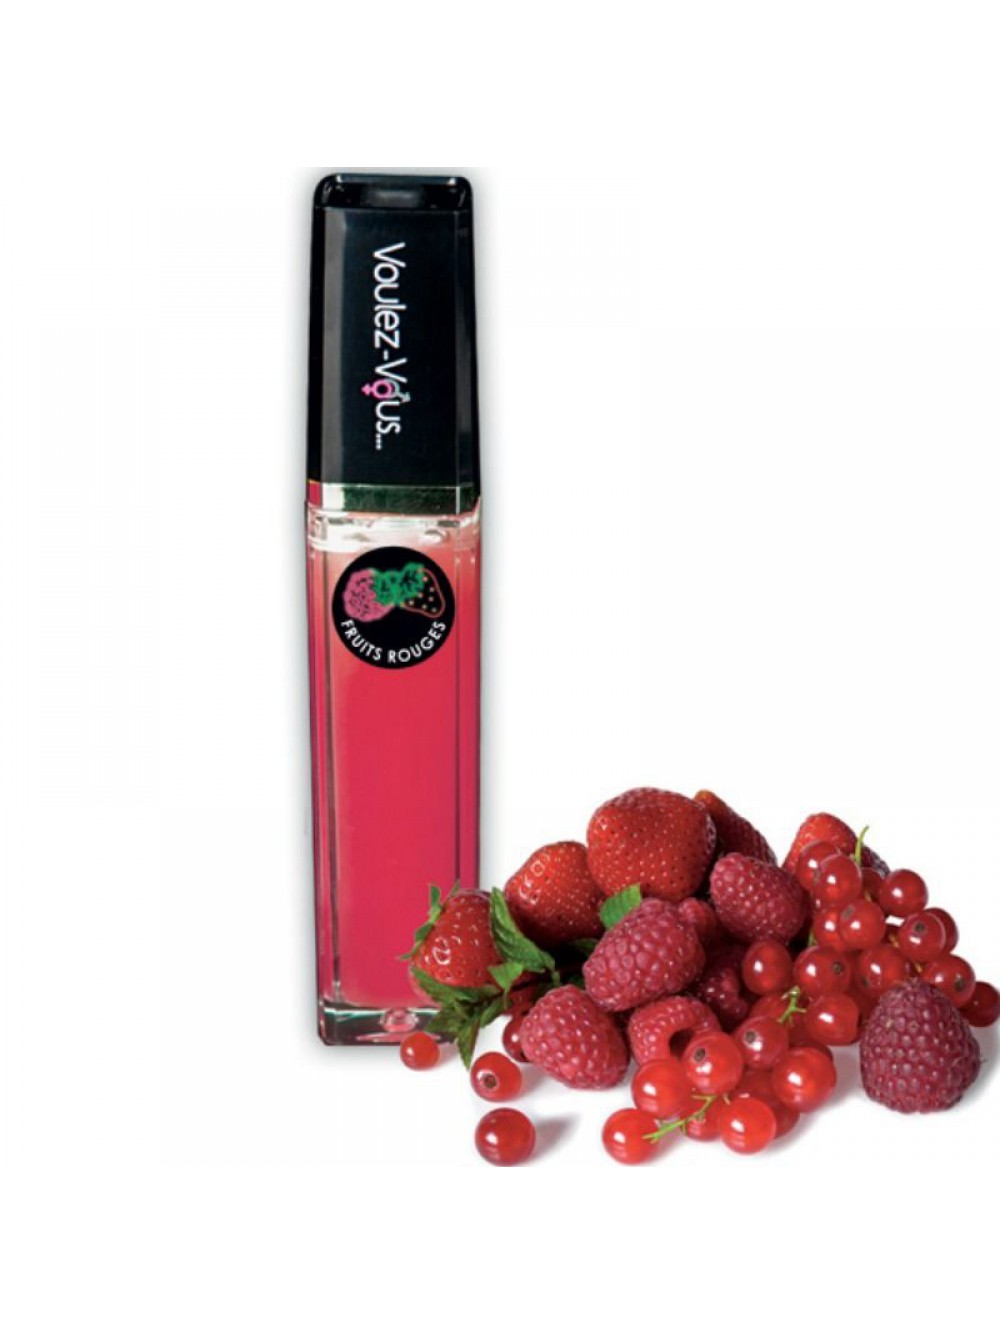 LIGHT GLOSS WITH EFFECT HOT COLD - RED BERRIES 3760151303524